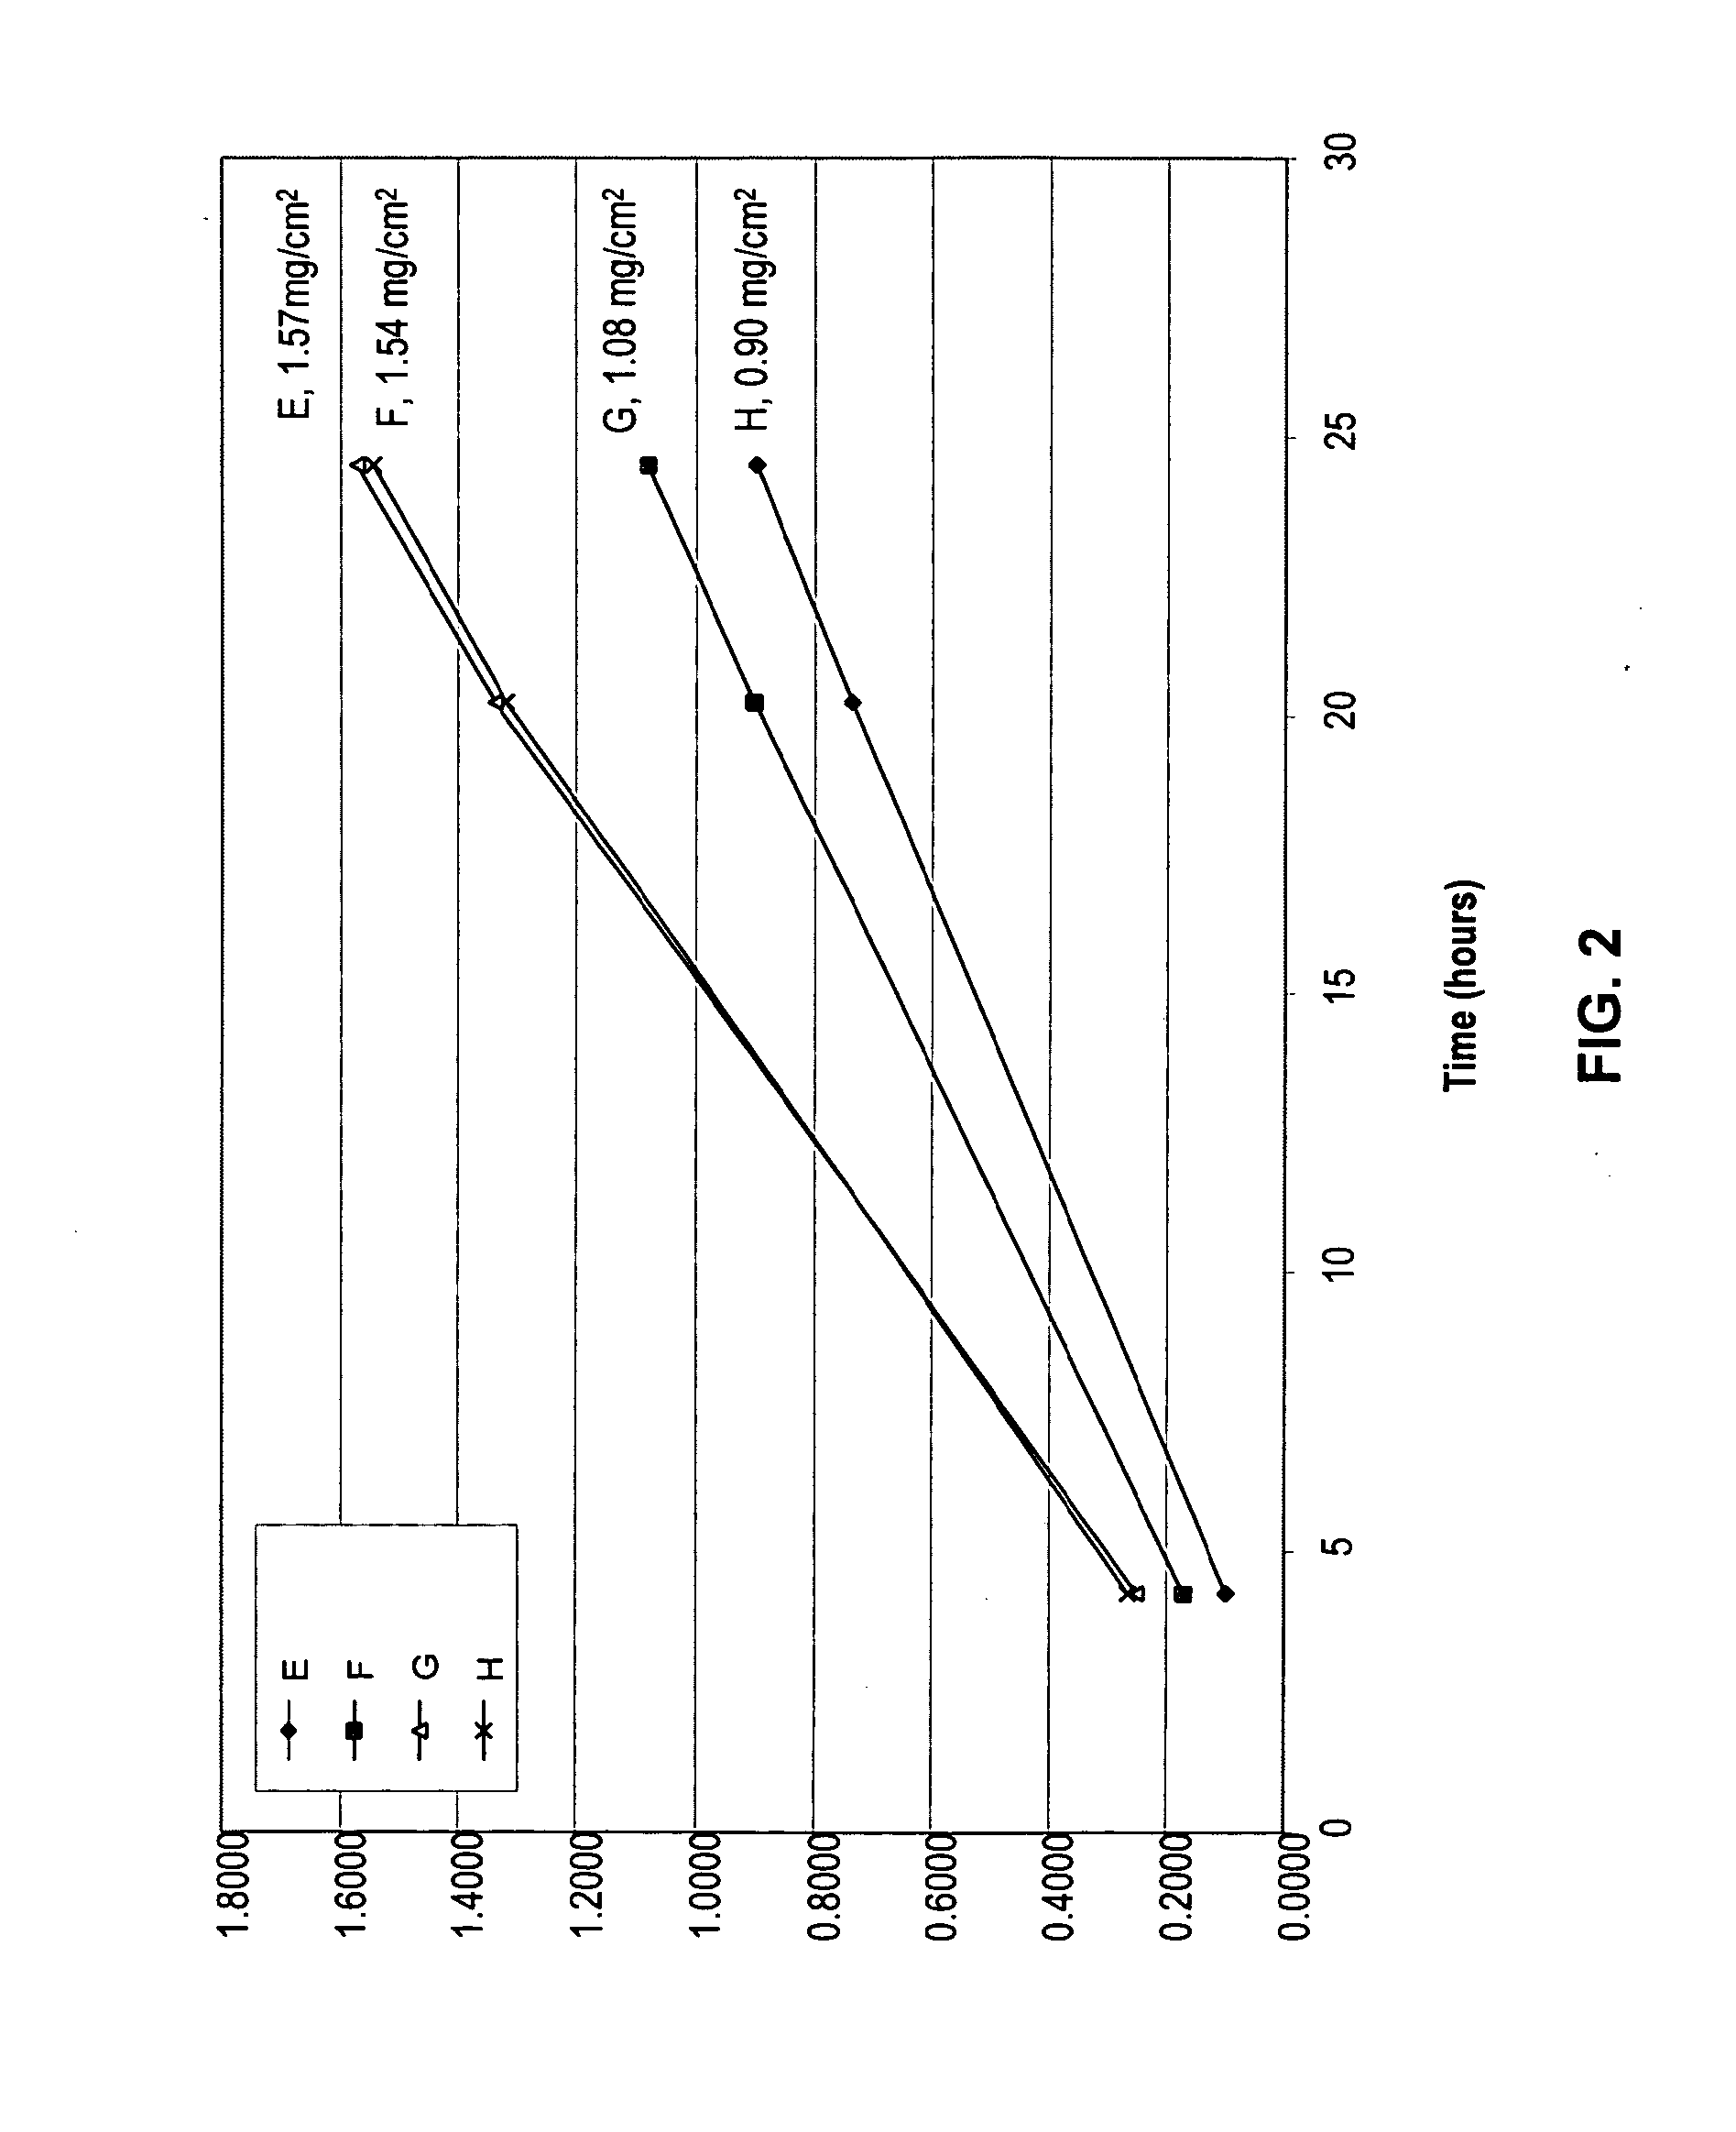 Transdermal administration of hydrophilic drugs using permeation enhancer composition